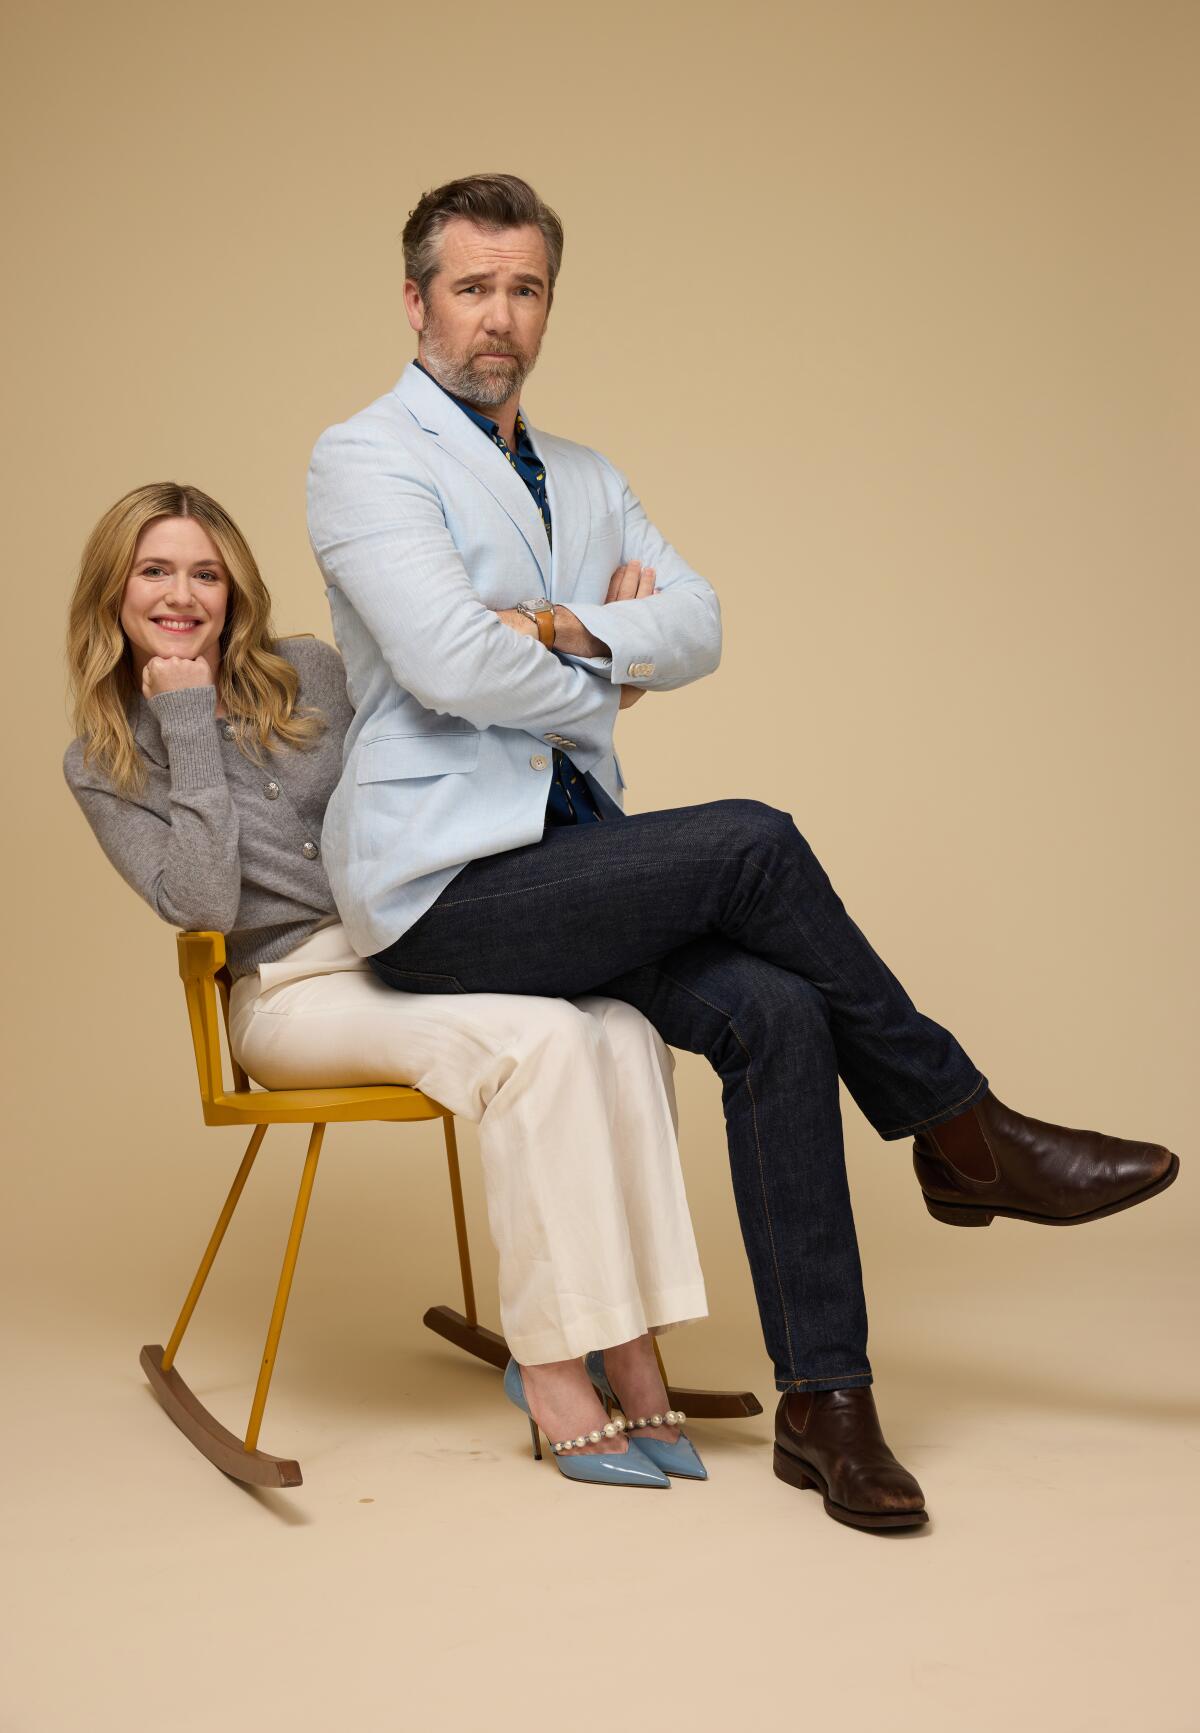  Patrick Brammal sits on his wife Harriet Dyer's lap for a portrait.